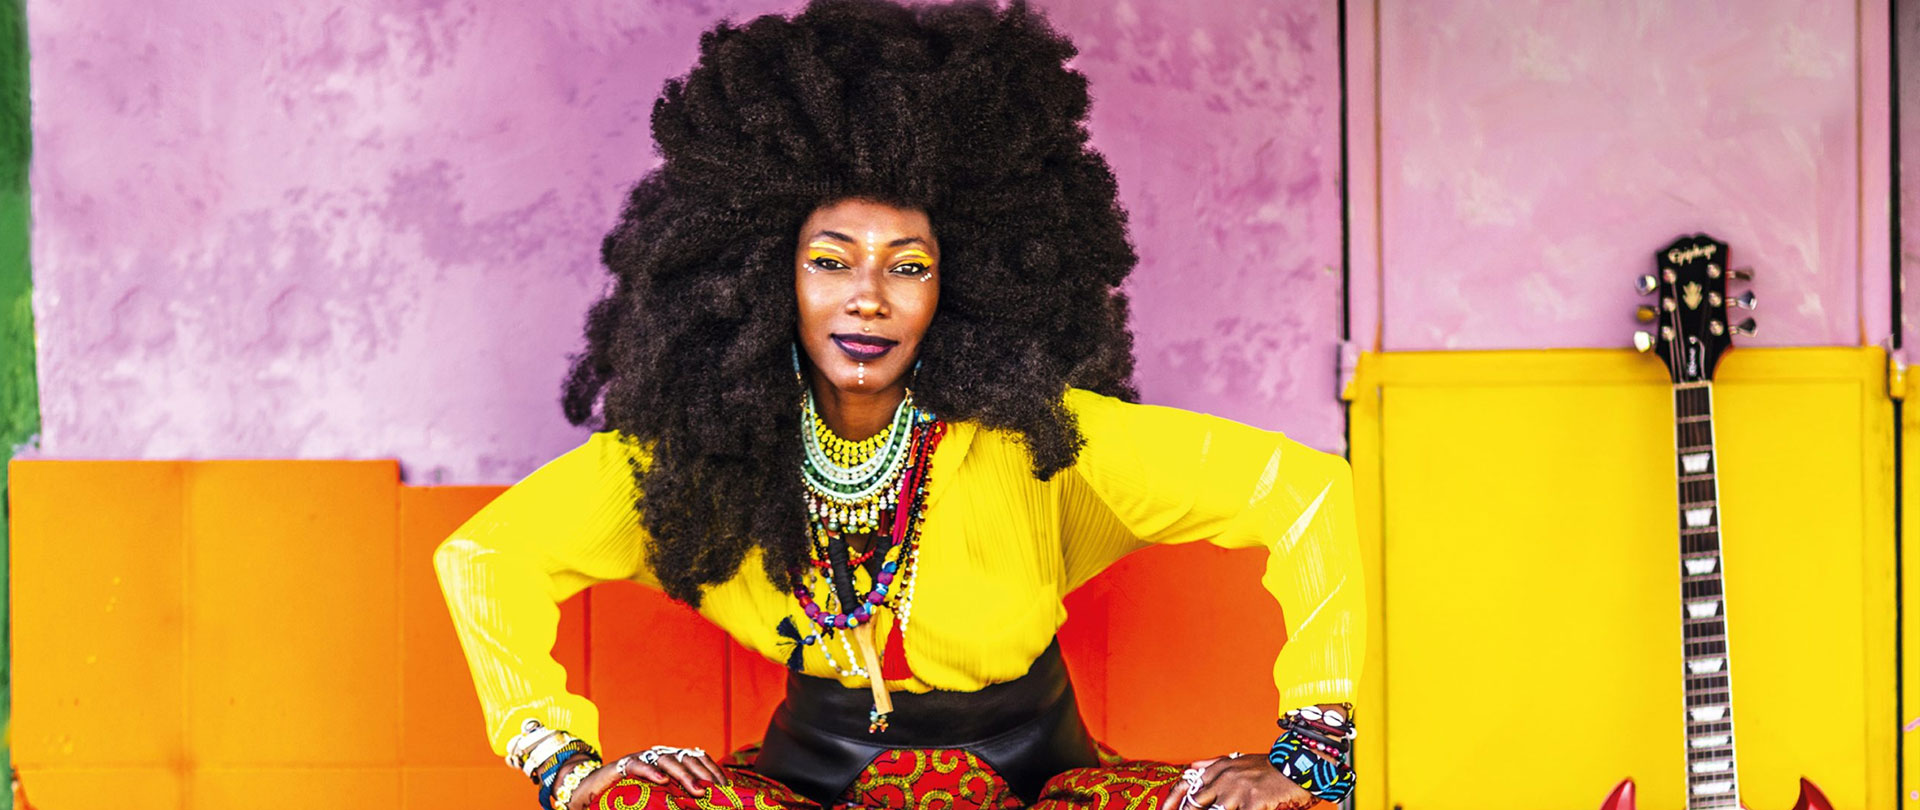 Fatoumata Diawara in vibrant dress against a pink and yellow exterior background